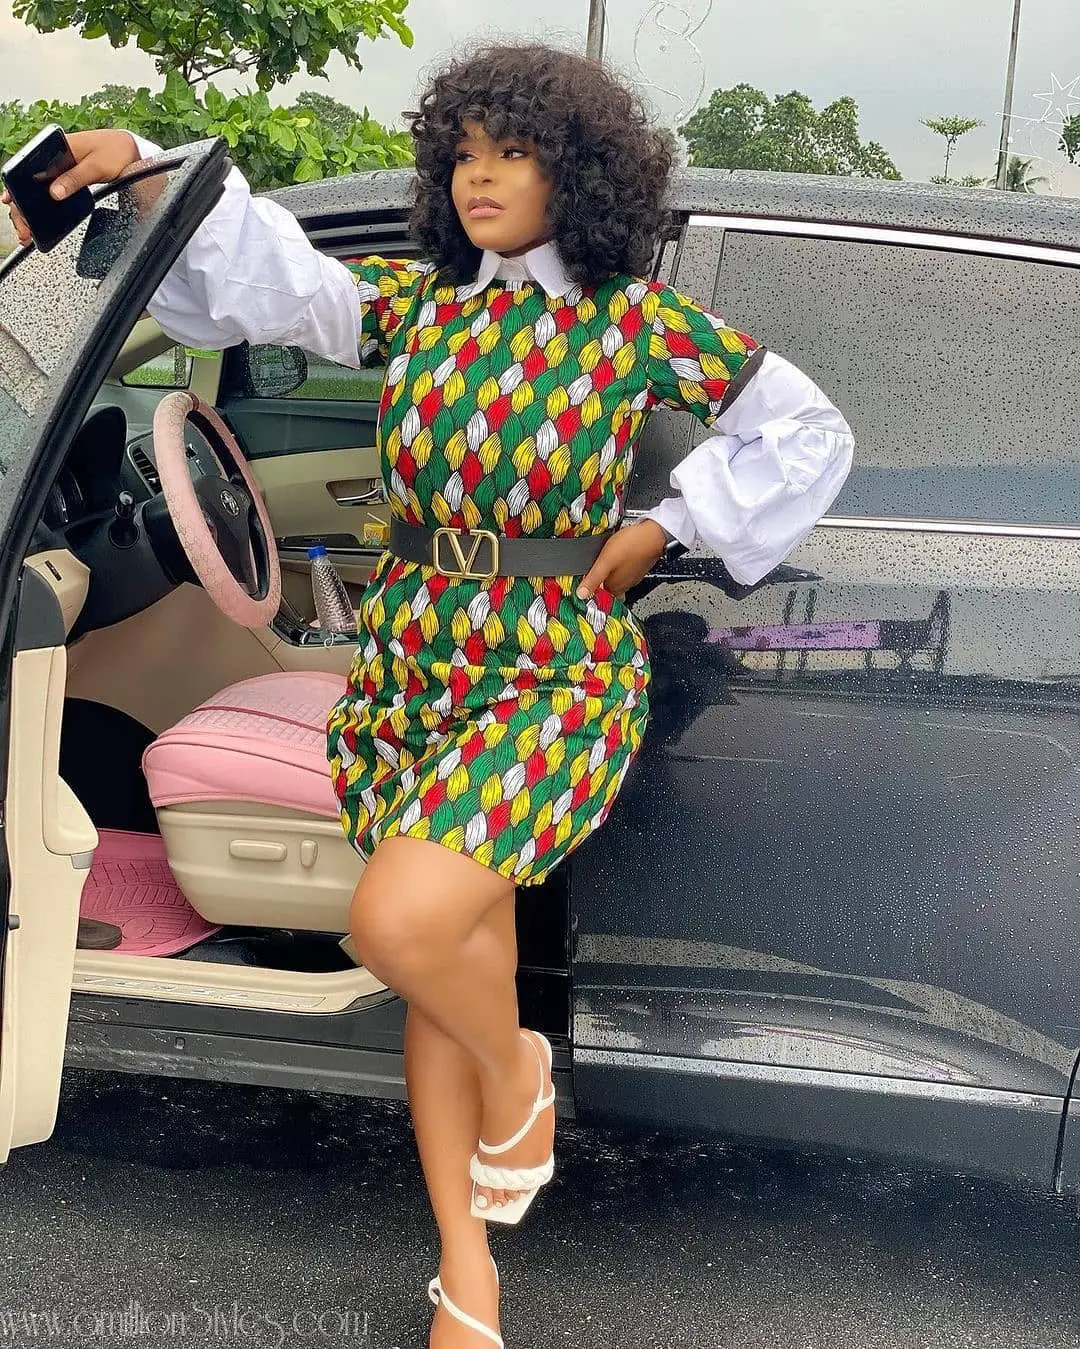 Check Out These 9 Ankara And White Shirt Mix Styles